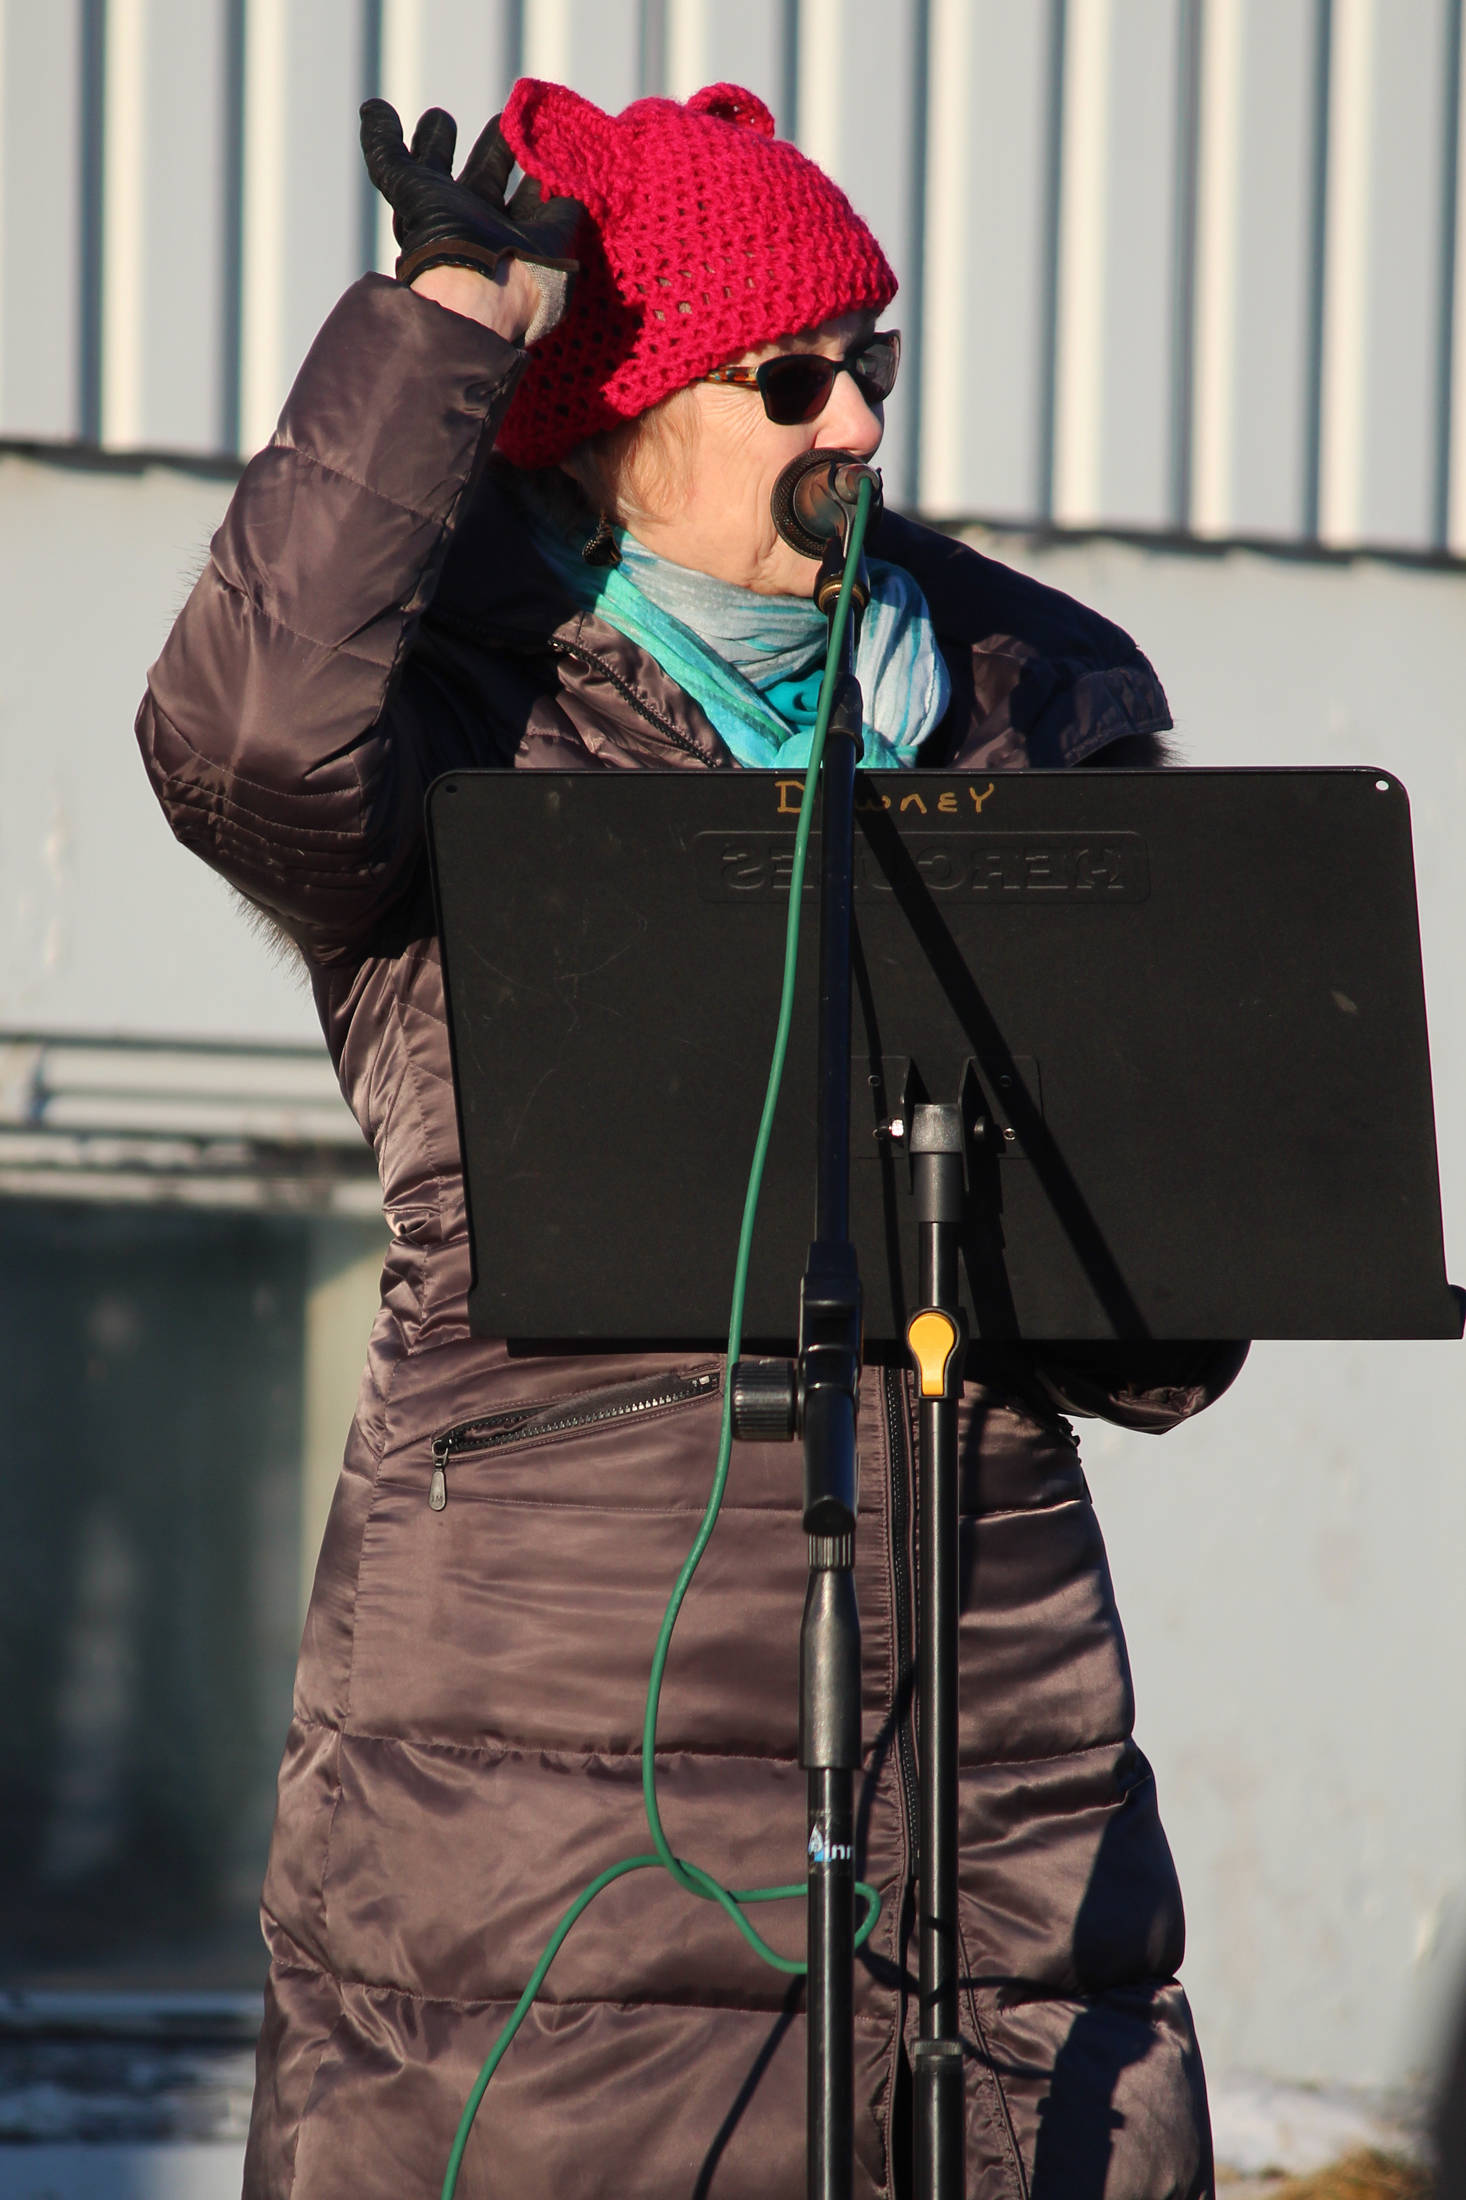 Susan Phillips Cushing speaks to a crowd of people before the third Women’s March on Homer on Saturday, Jan. 19, 2019 at the Homer Education and Recreation Complex in Homer, Alaska. She was one of three speakers. (Photo by Megan Pacer/Homer News)